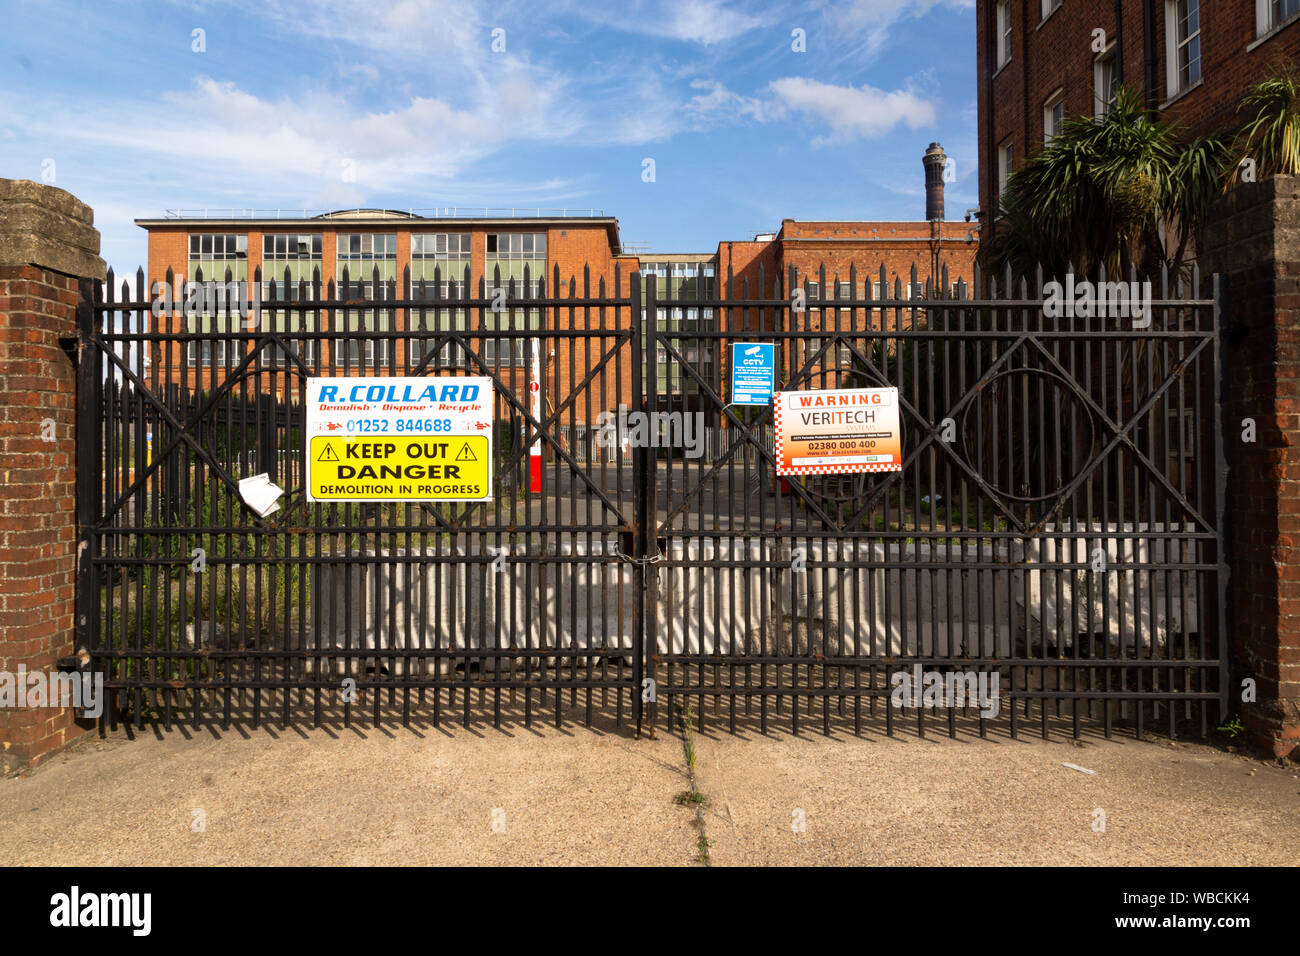 The Horlick's Factory, Slough, Berkshire, now decommissioned. The buildings and land bought by Berkley Homes in August 2018, on track for renovation. Stock Photo